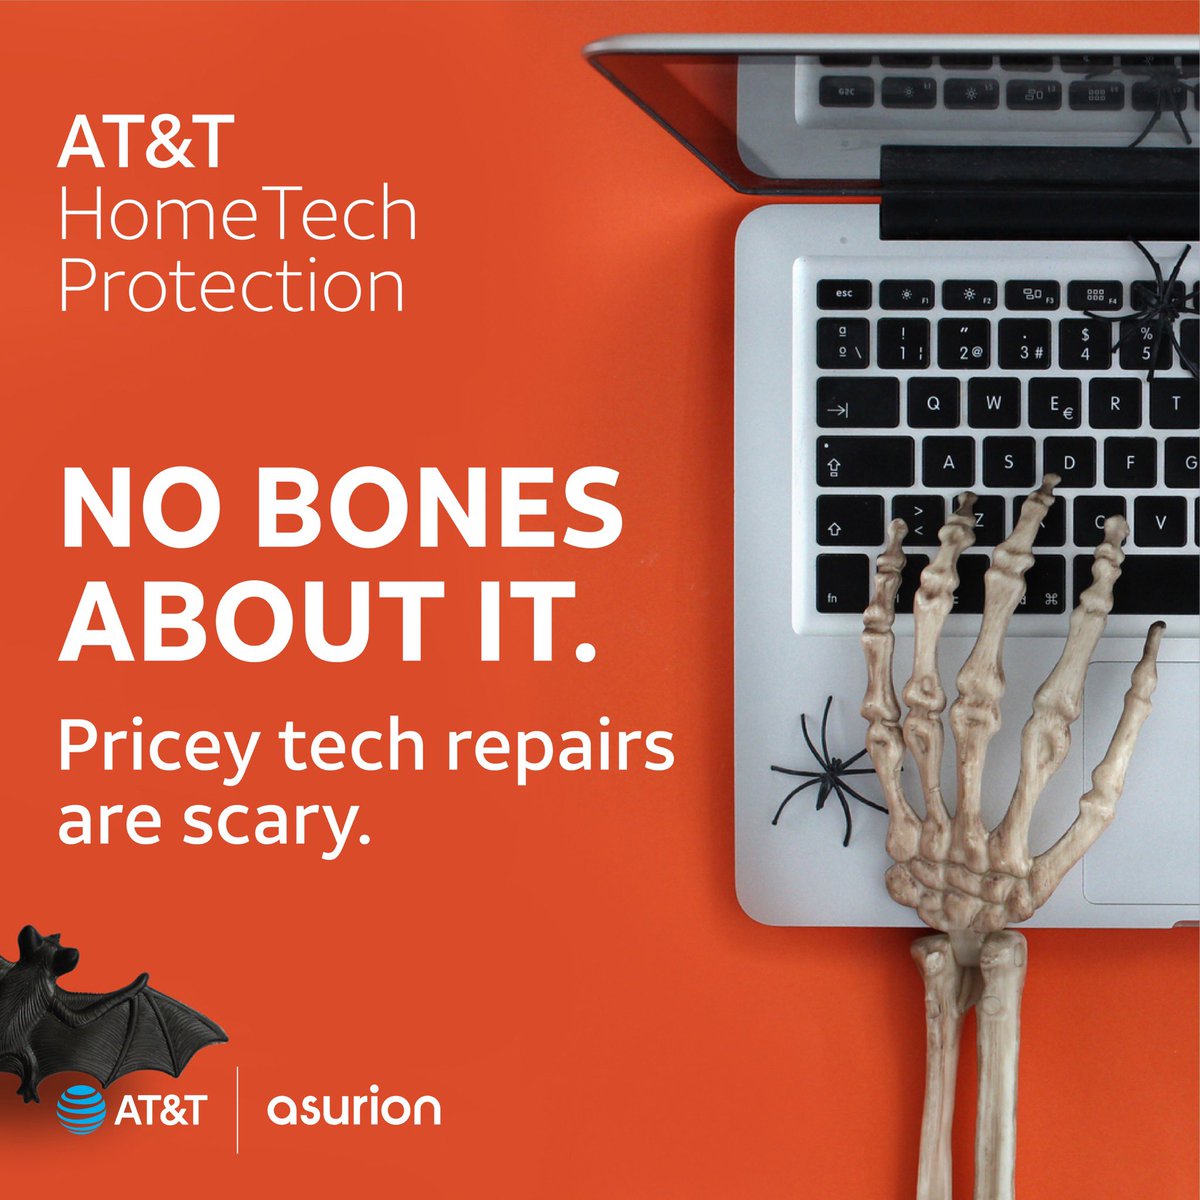 Cracked screens! Malfunctions! 💀 We all have devices at home to protect. Remember to always offer HomeTech Protection to your customers. 🕷️ #OurNE ☠️ #HappyHalloween